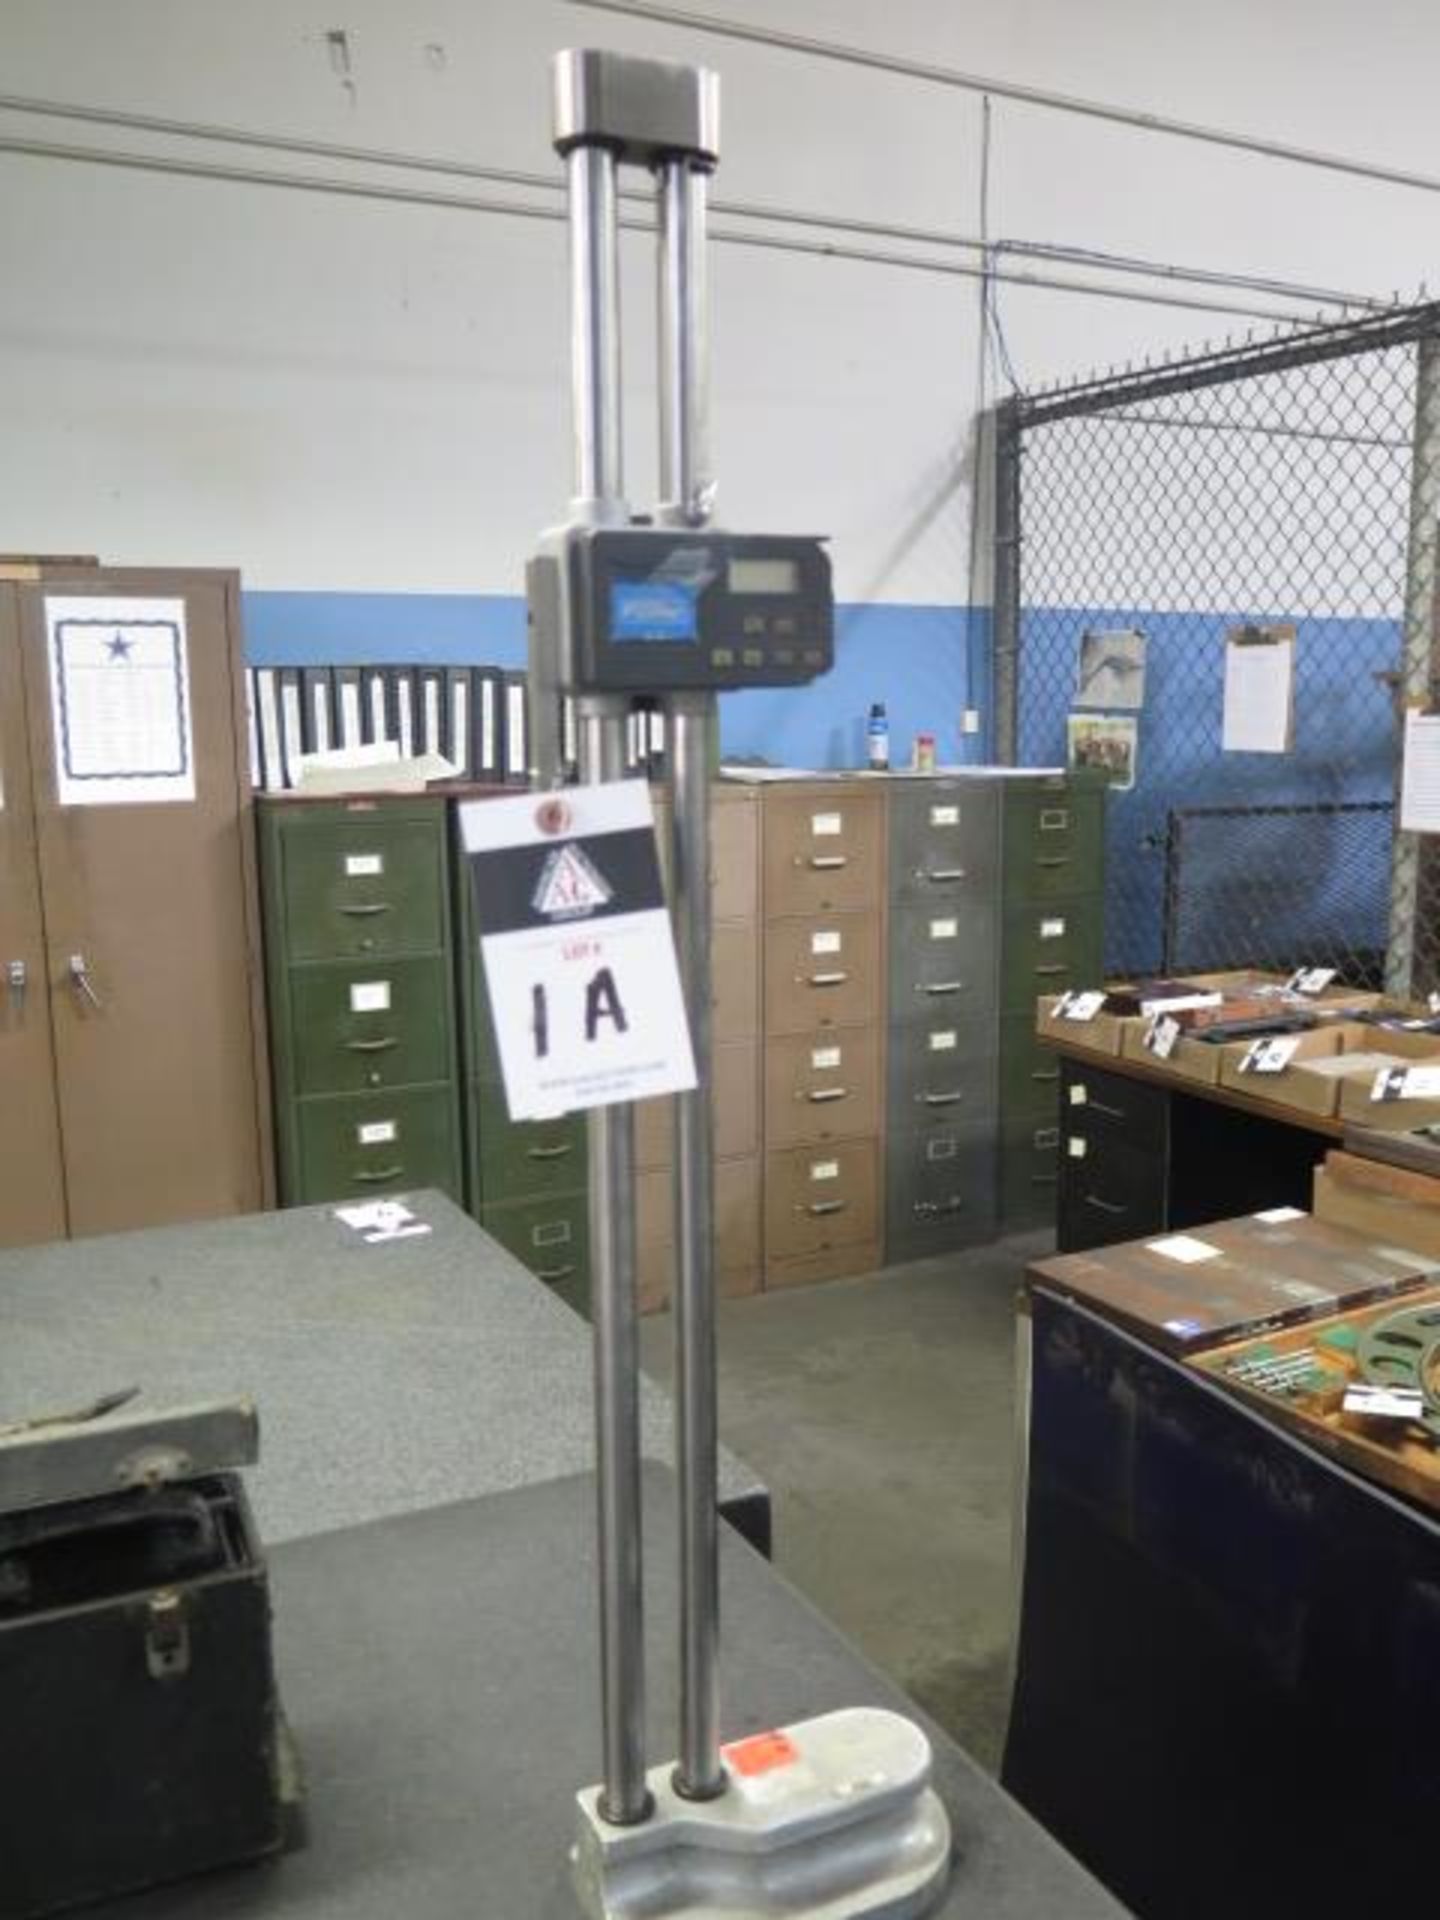 Fowler 24" Digital Height Gage (SOLD AS-IS - NO WARRANTY)